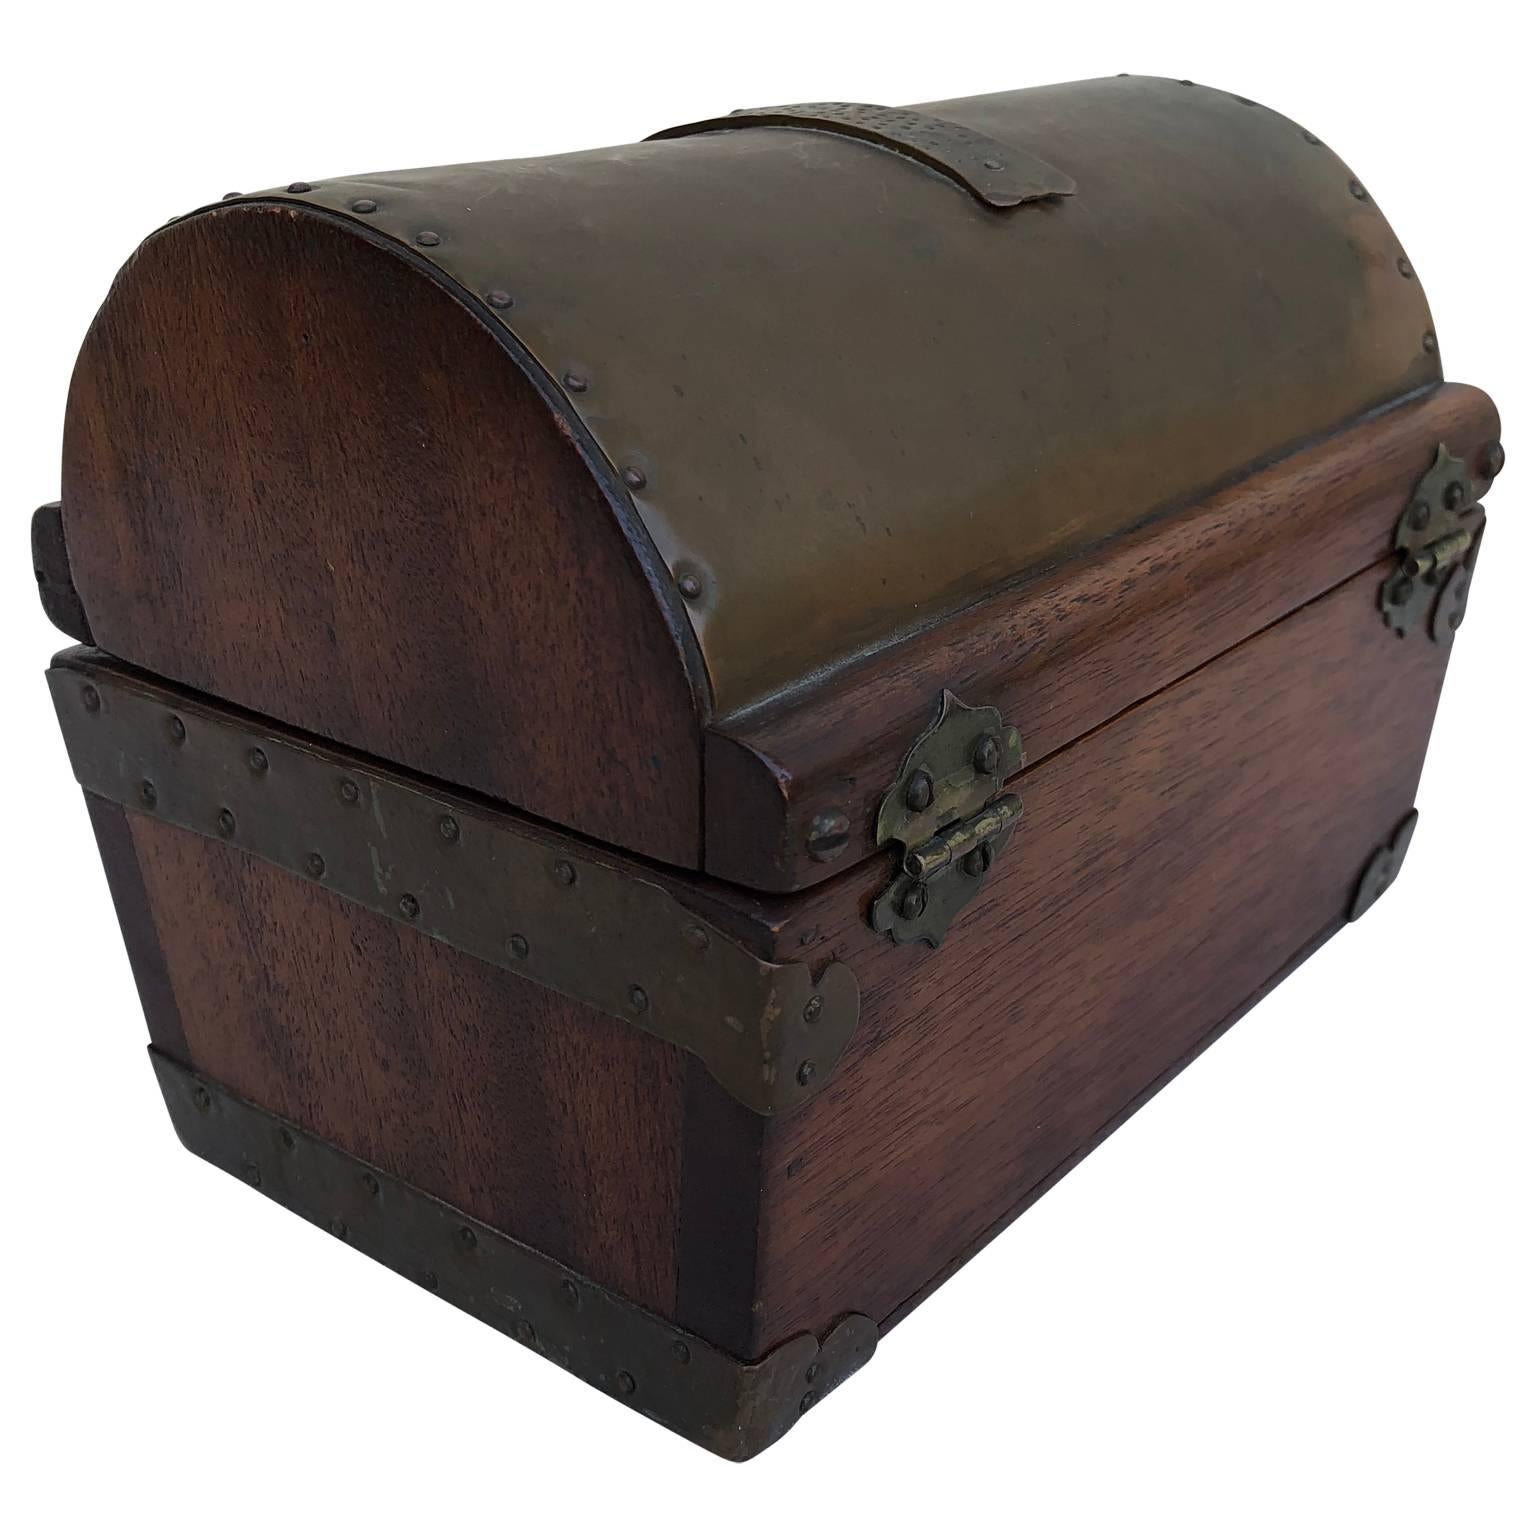 20th Century Small Brass and Copper Plated Wooden Jewelry Casket